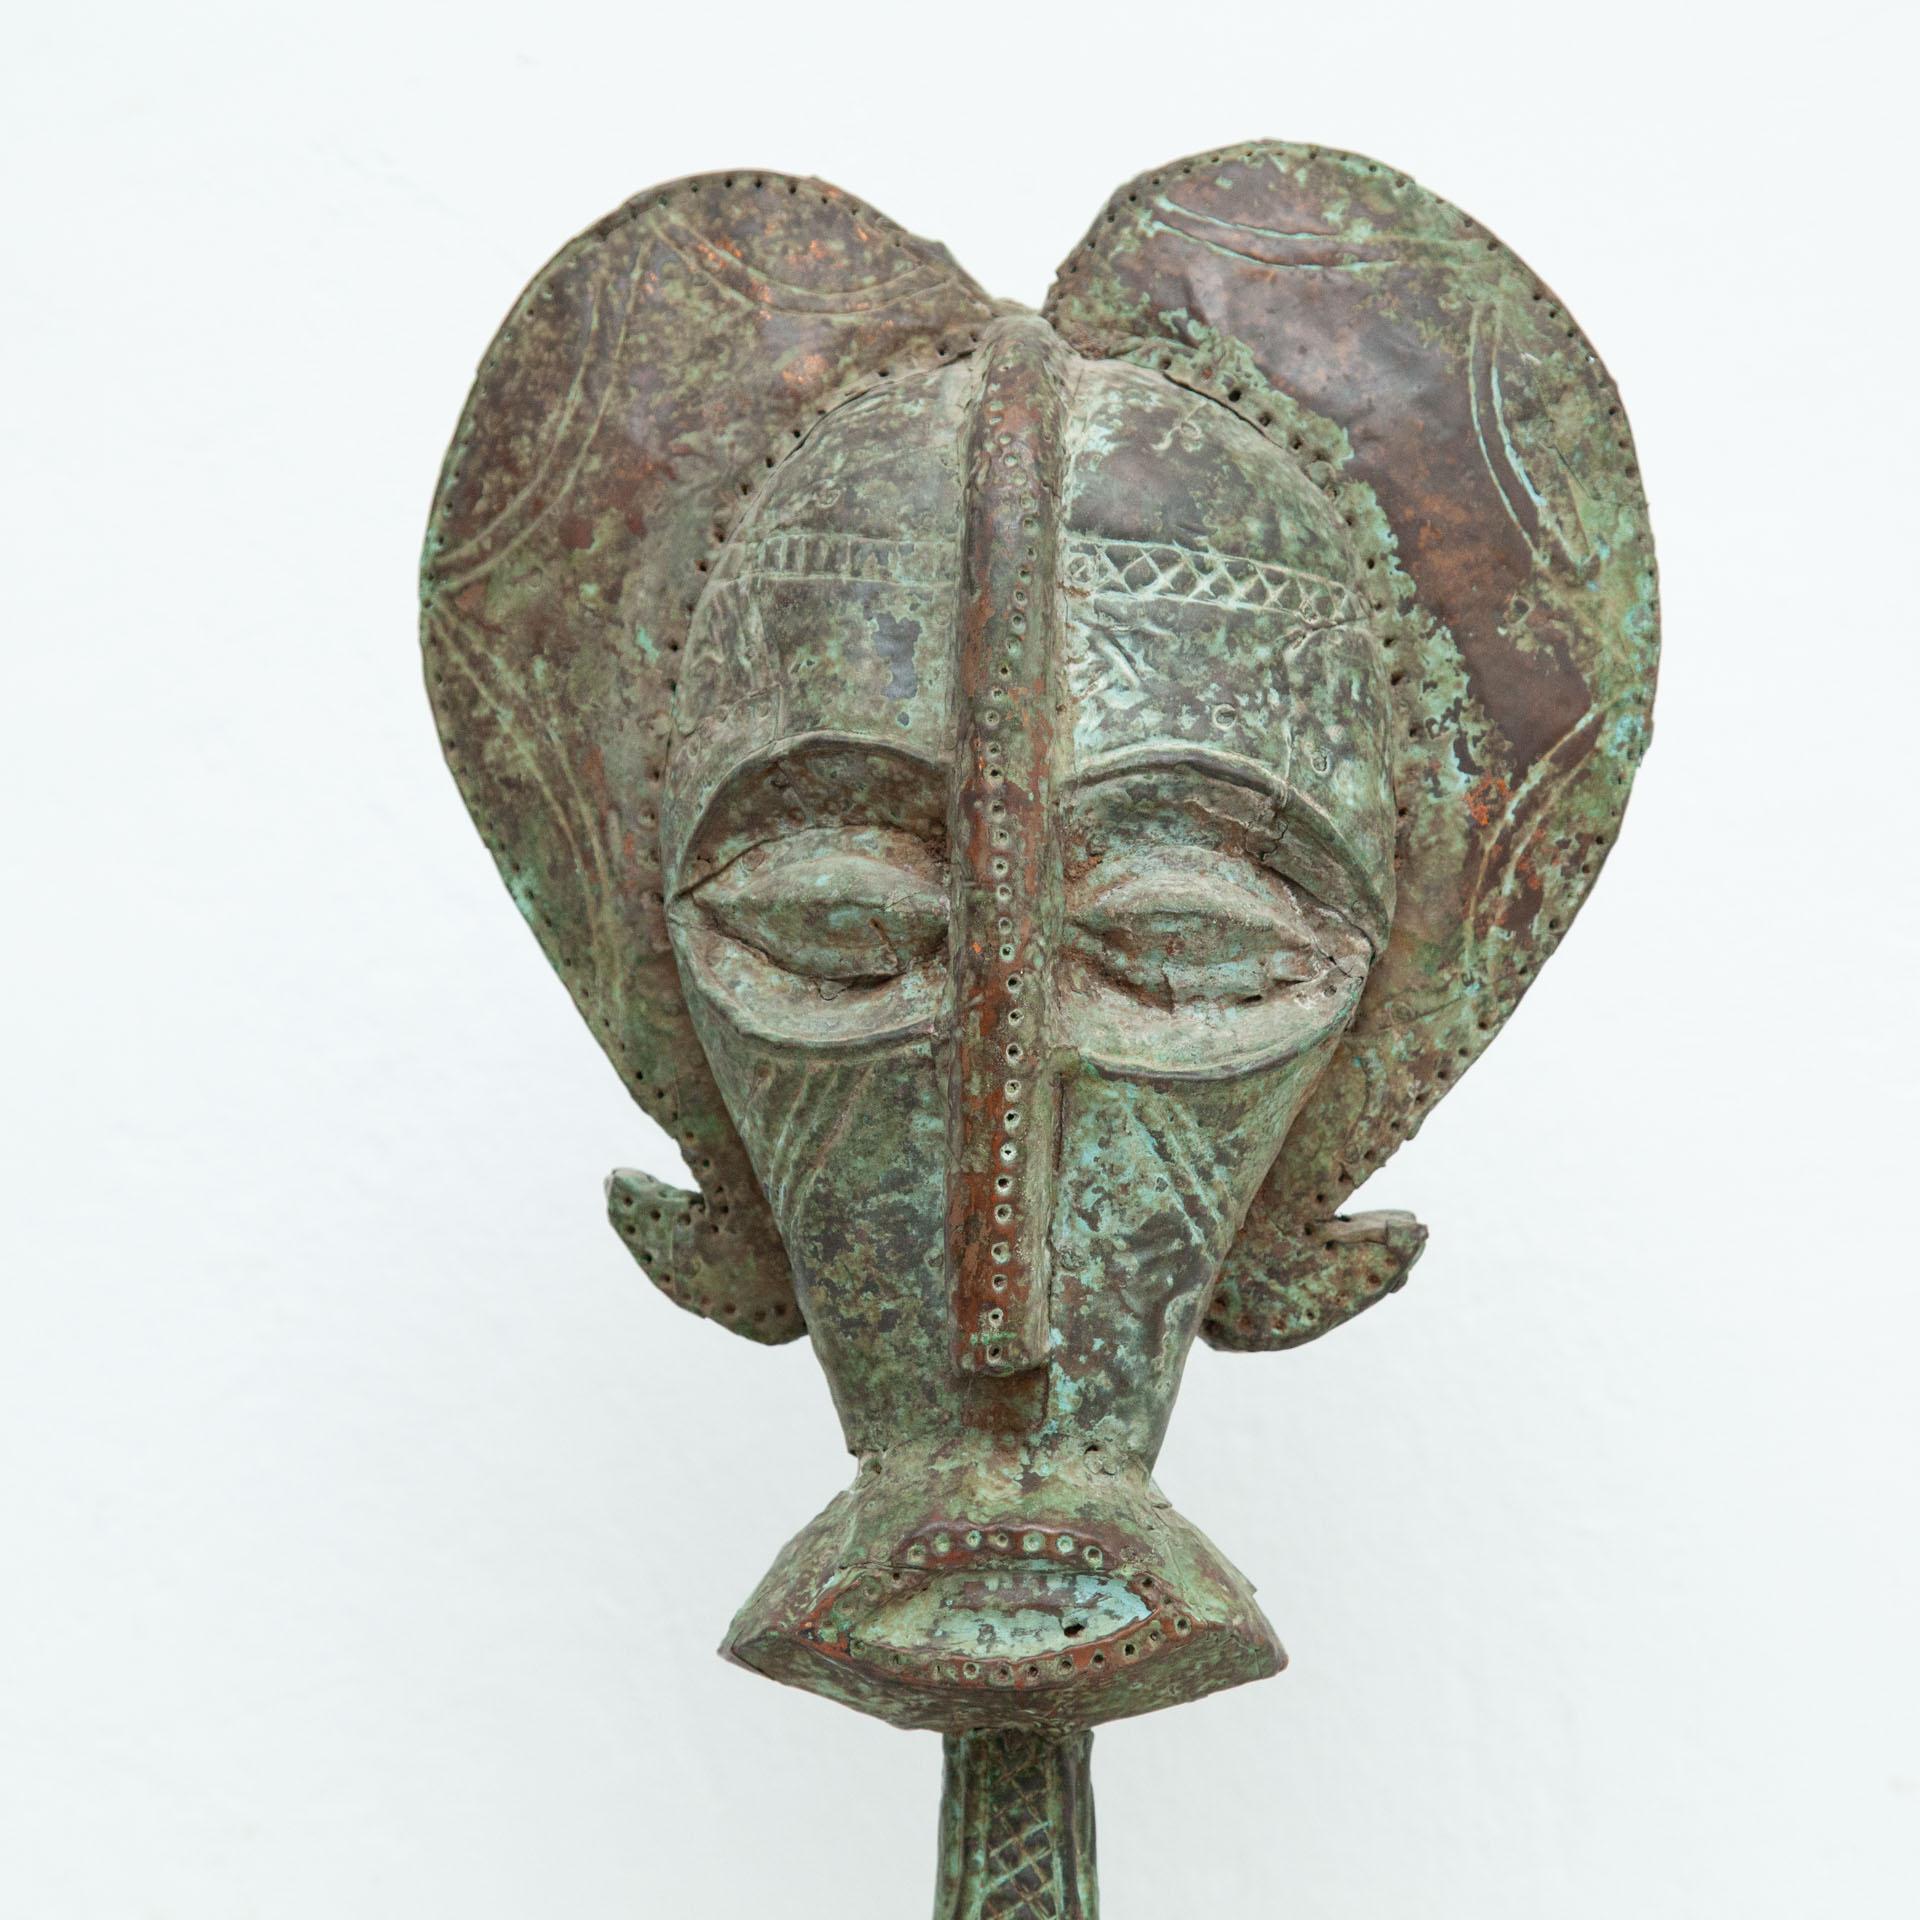 Late 19th century Kota-Obamba Reliquary Figure from Gabón, Africa.

In original condition, wear consistent with age and use, preserving a beautiful patina.

Central African reliquary sculpture has been legitimately considered to 